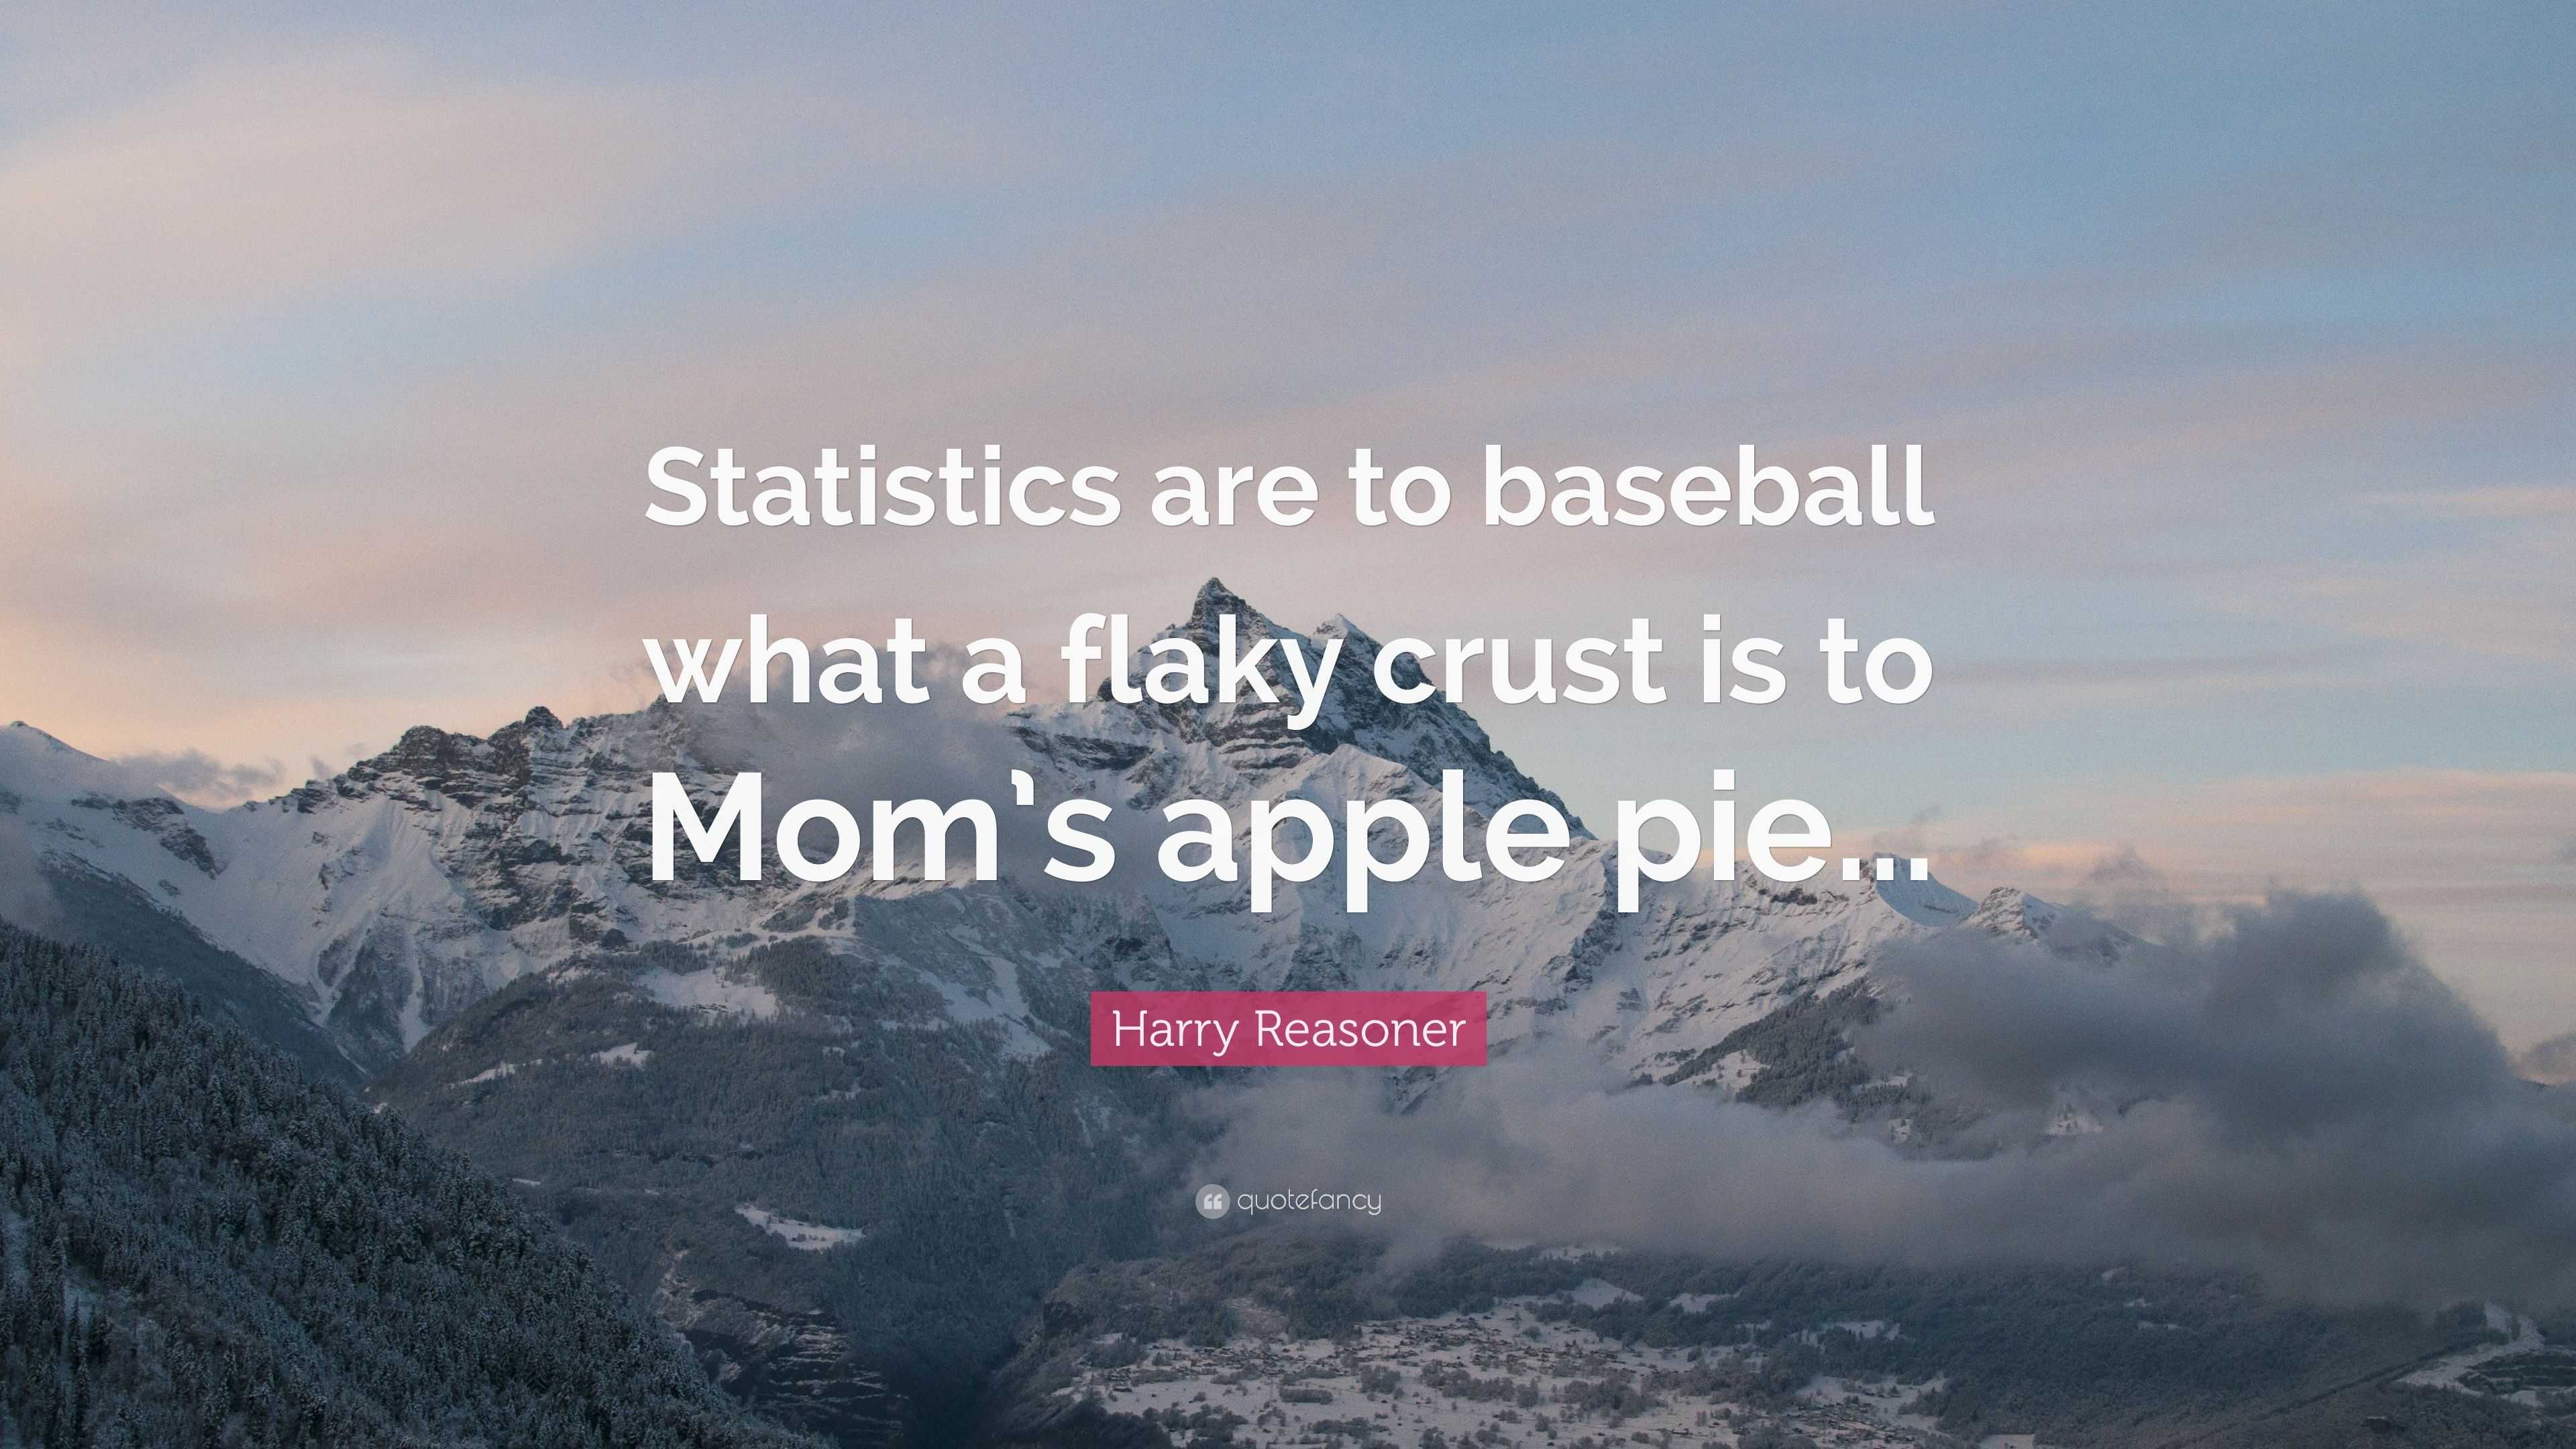 Harry Reasoner Quote “statistics Are To Baseball What A Flaky Crust Is To Moms Apple Pie” 1053